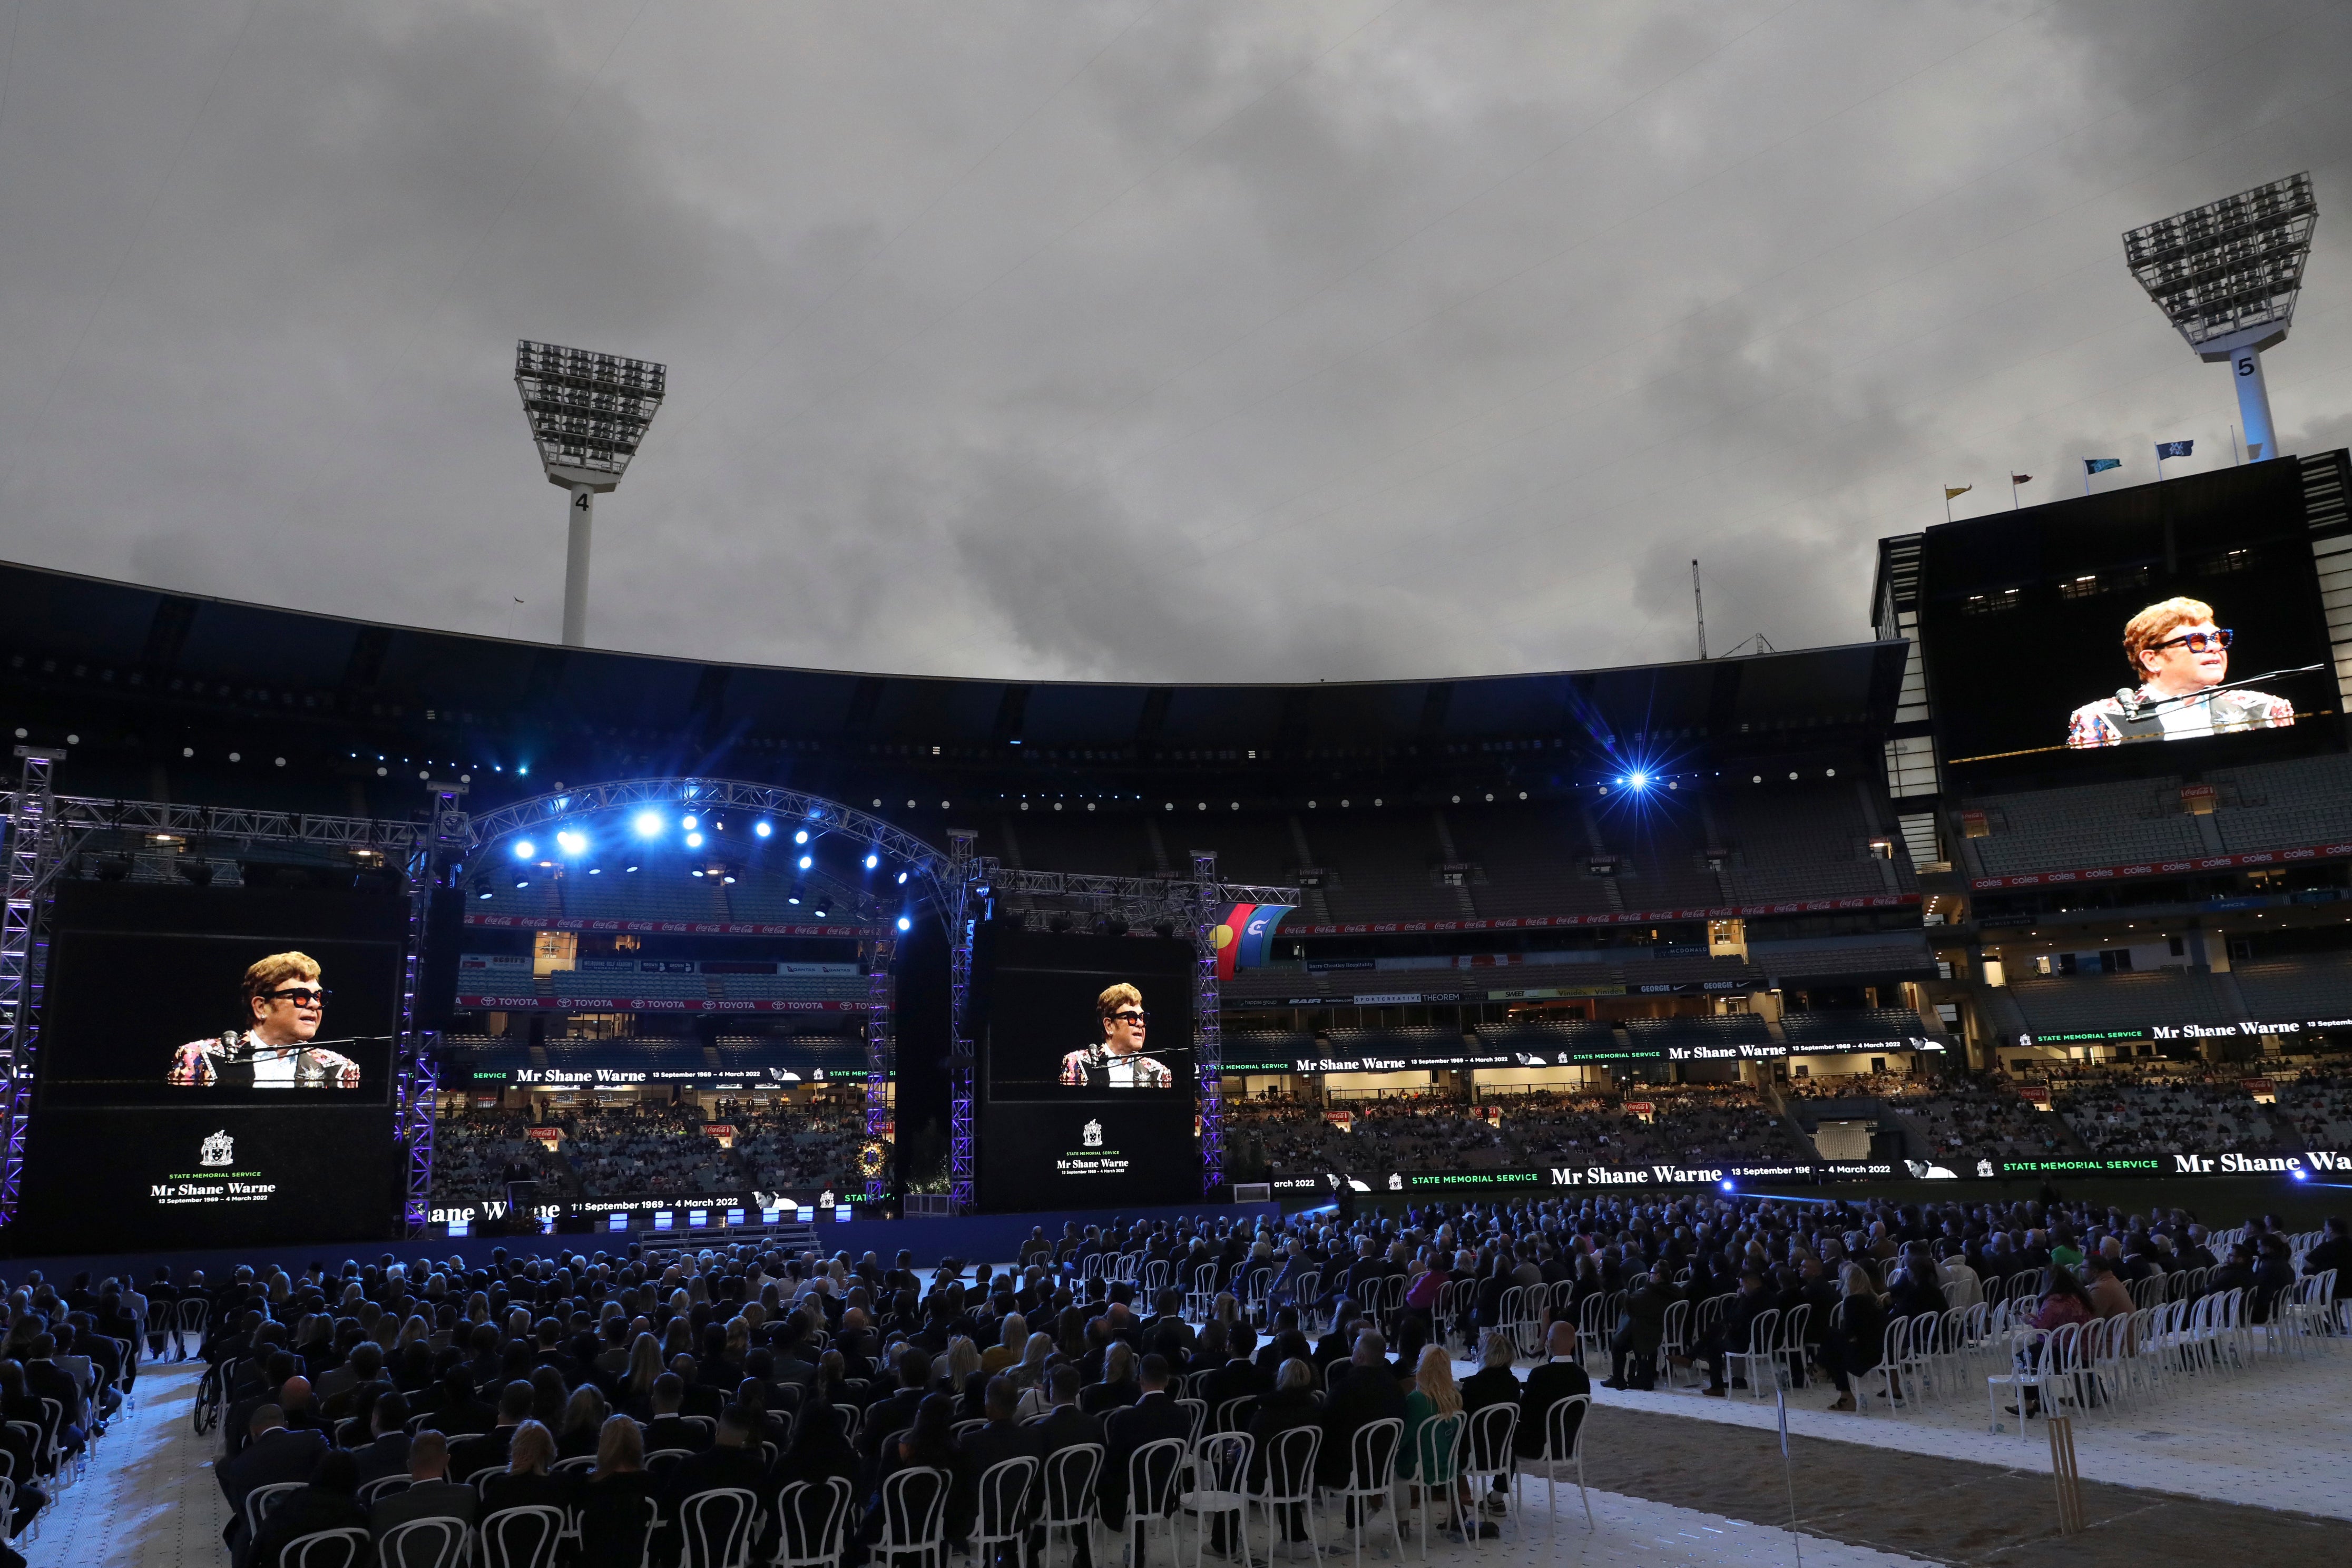 A performance by Elton John was projected on to screens during the service (Asanka Brendon Ratnayake/AP)